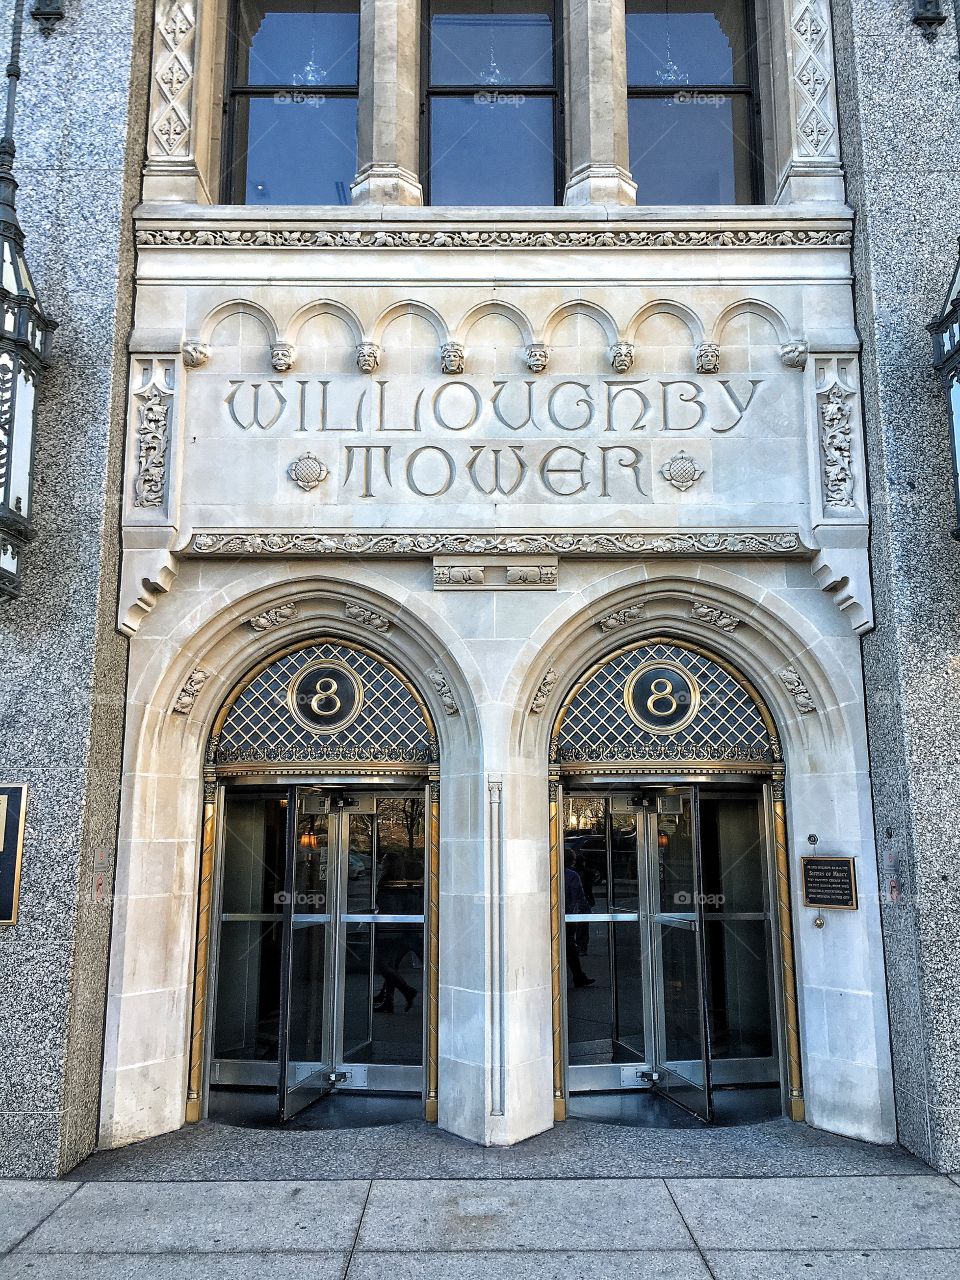 Willoughby Tower Doors.

Chicago, IL.